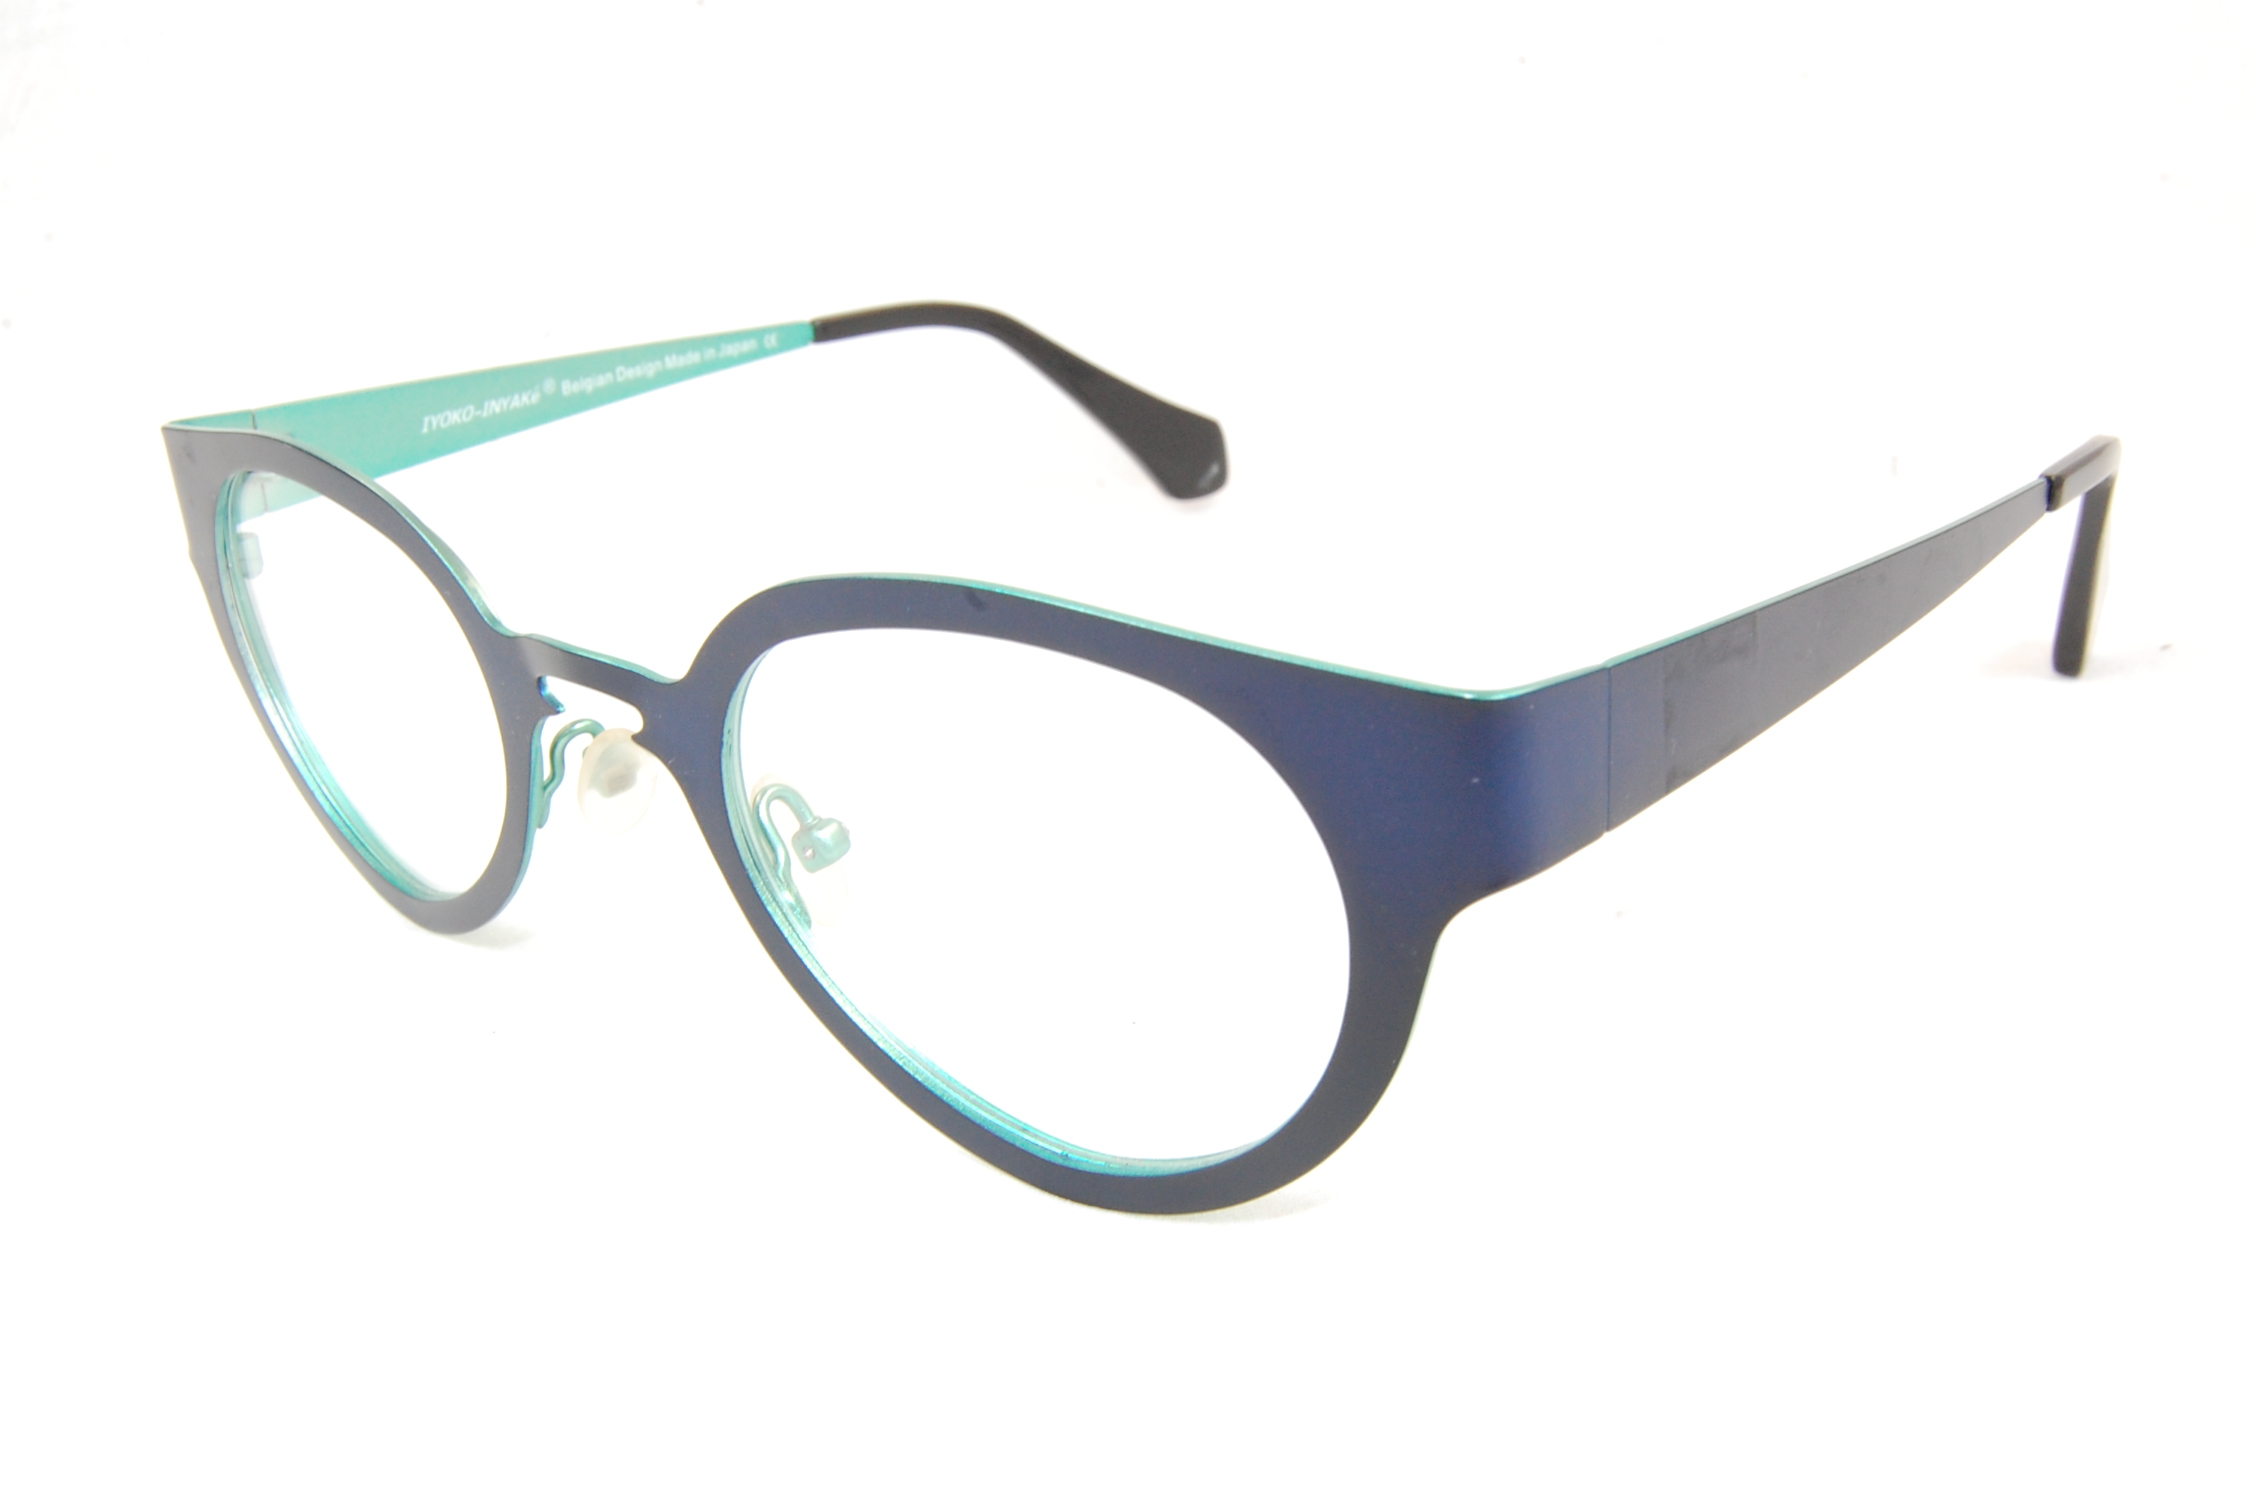 IYOKO INYAKE OPTIQUE 10/10 FACHES THUMESNIL